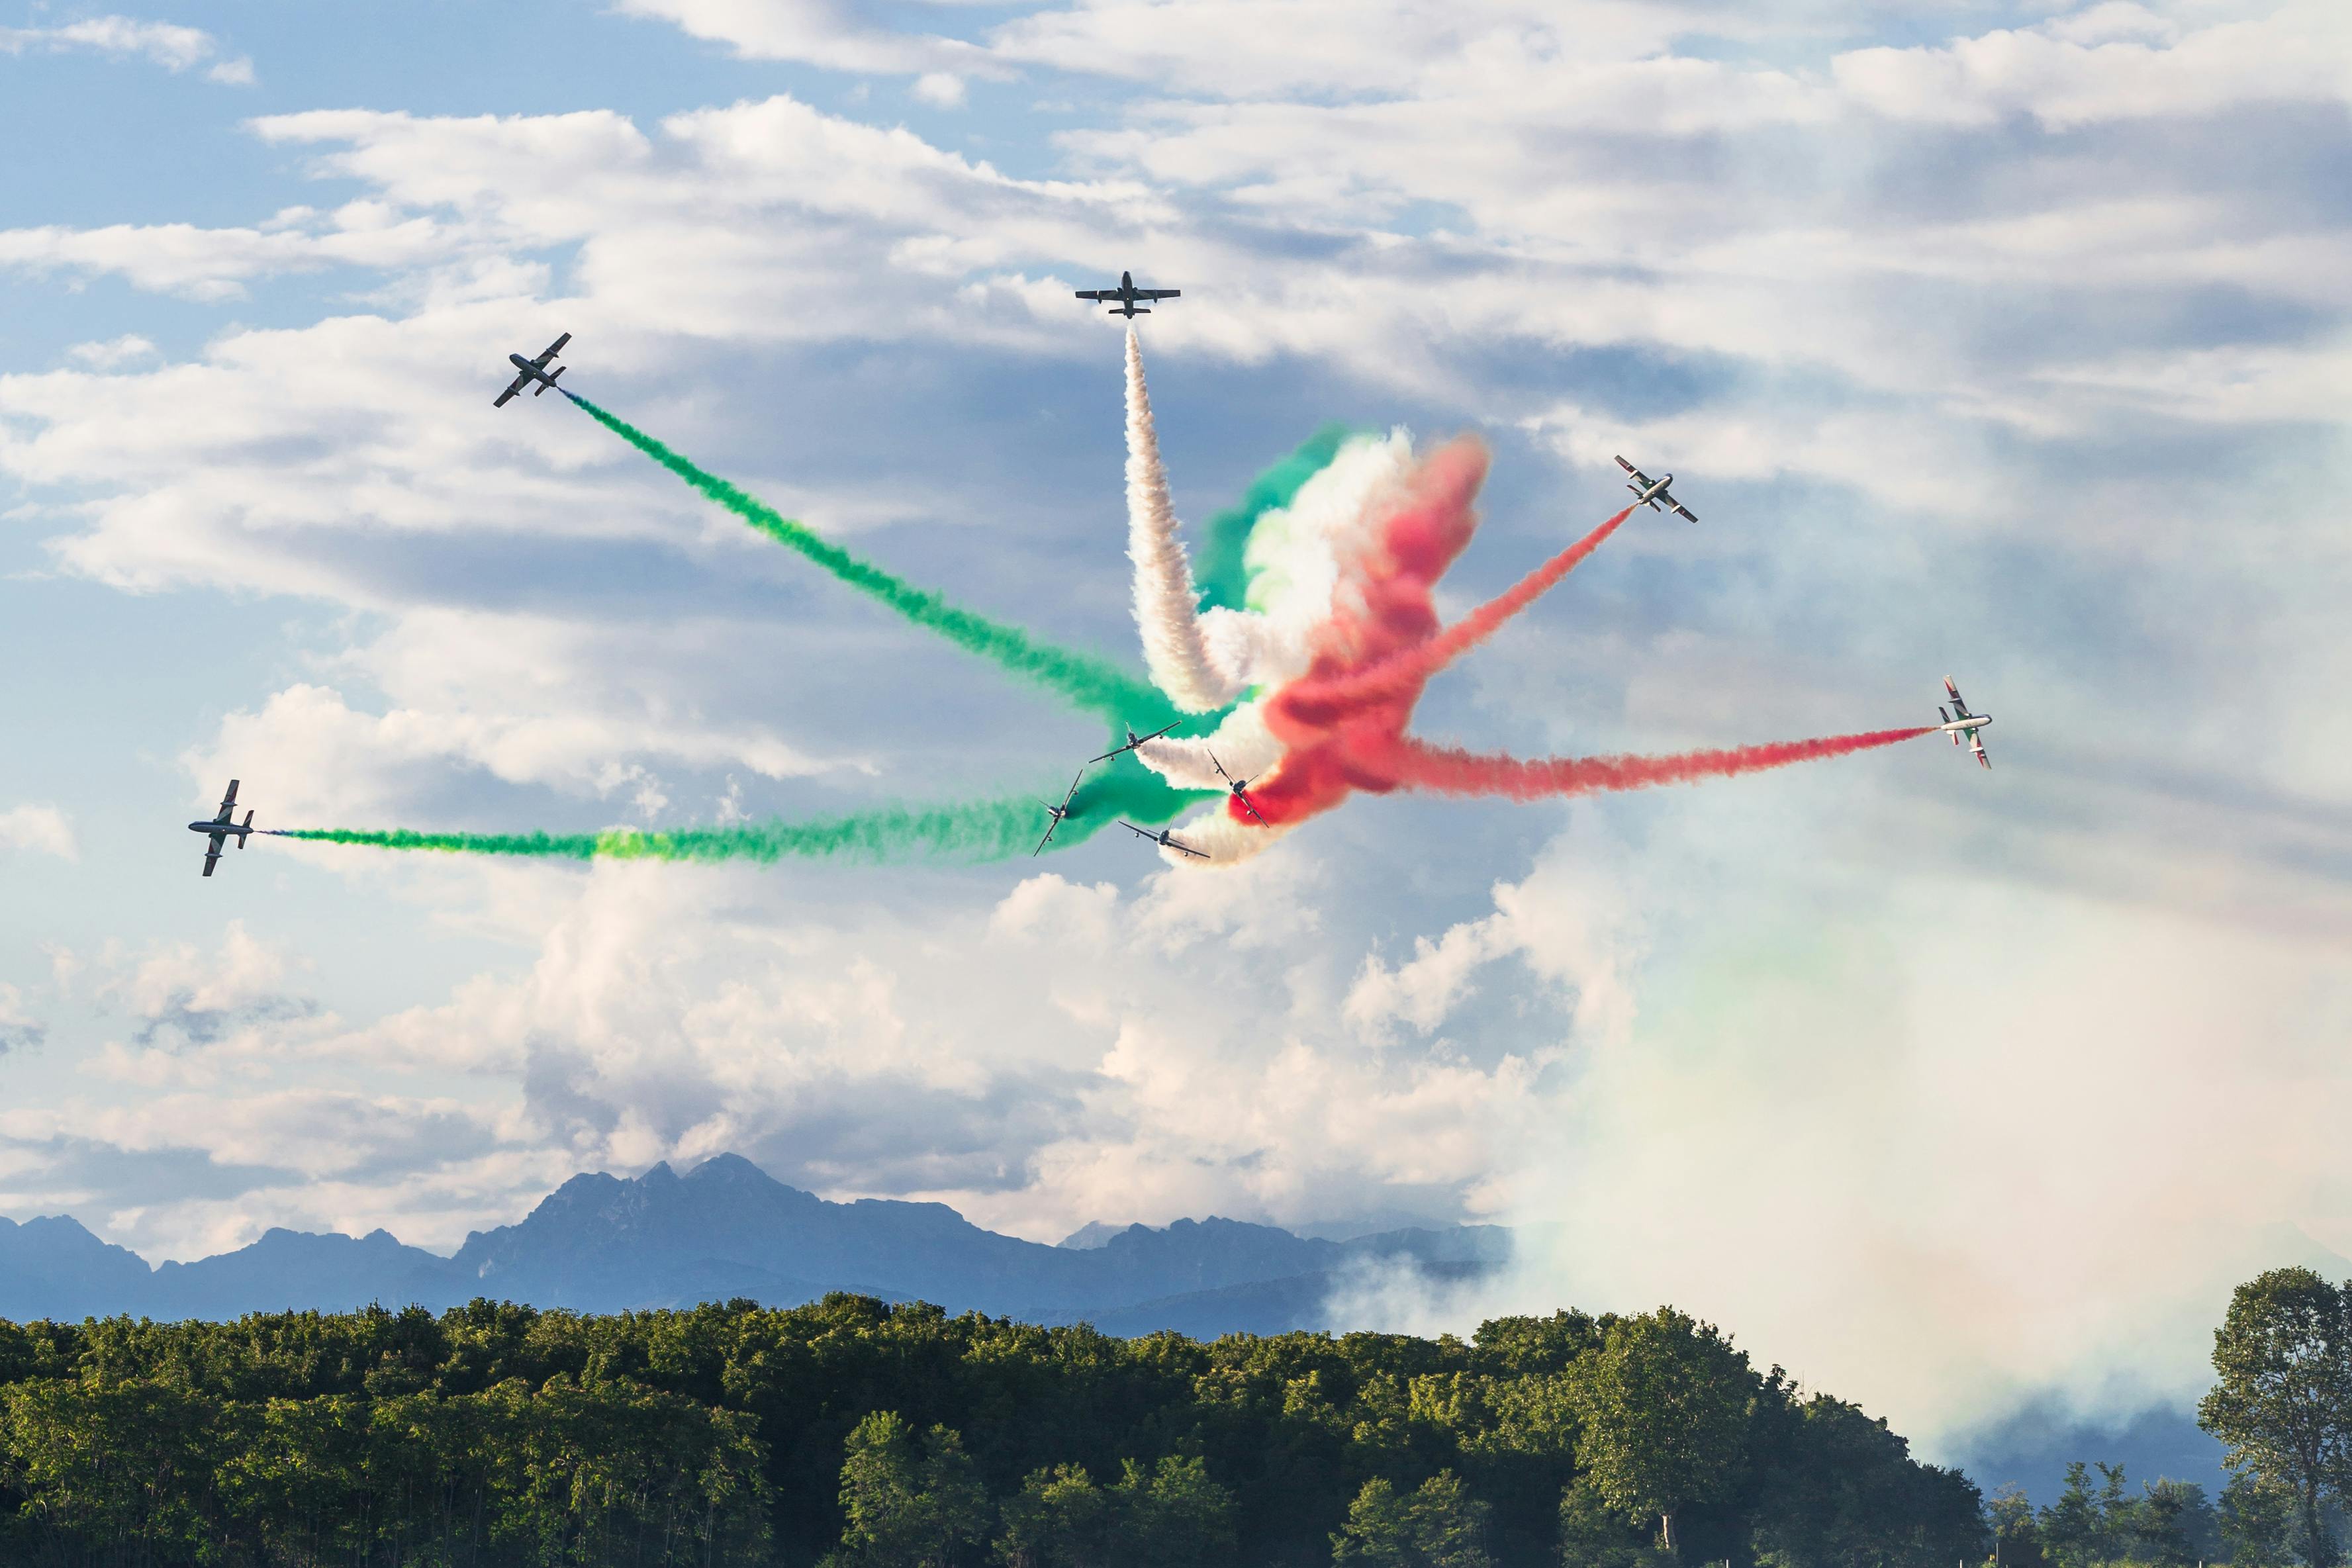 Colorful show with planes